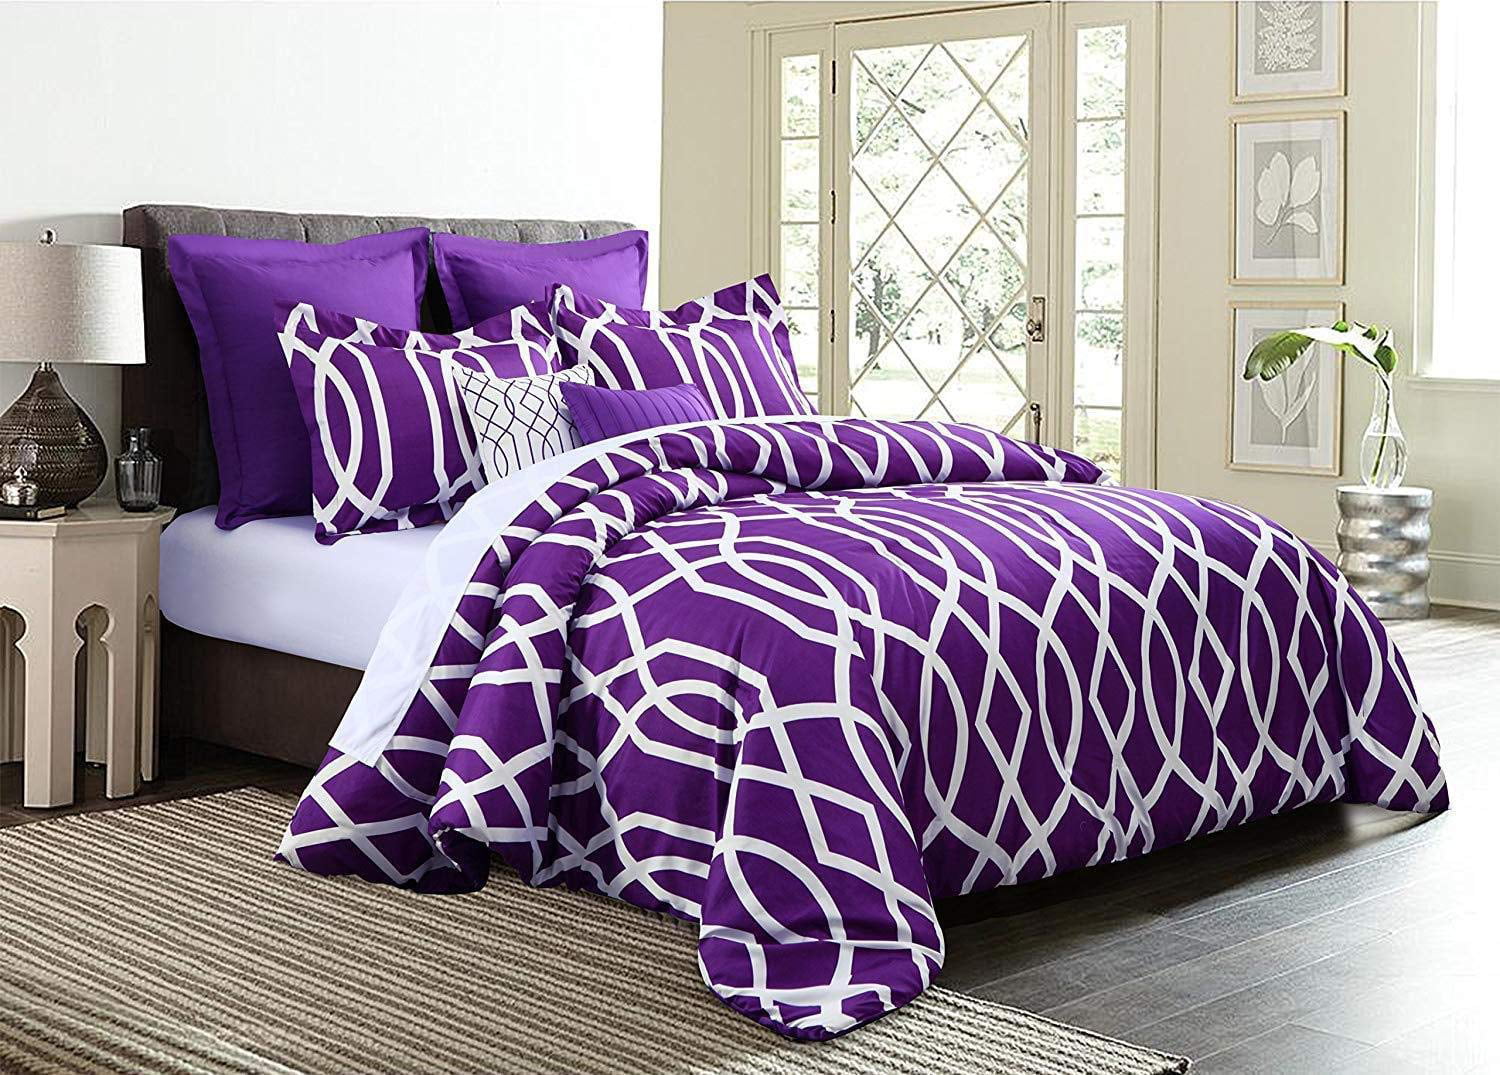 fitted sheet for purple mattress